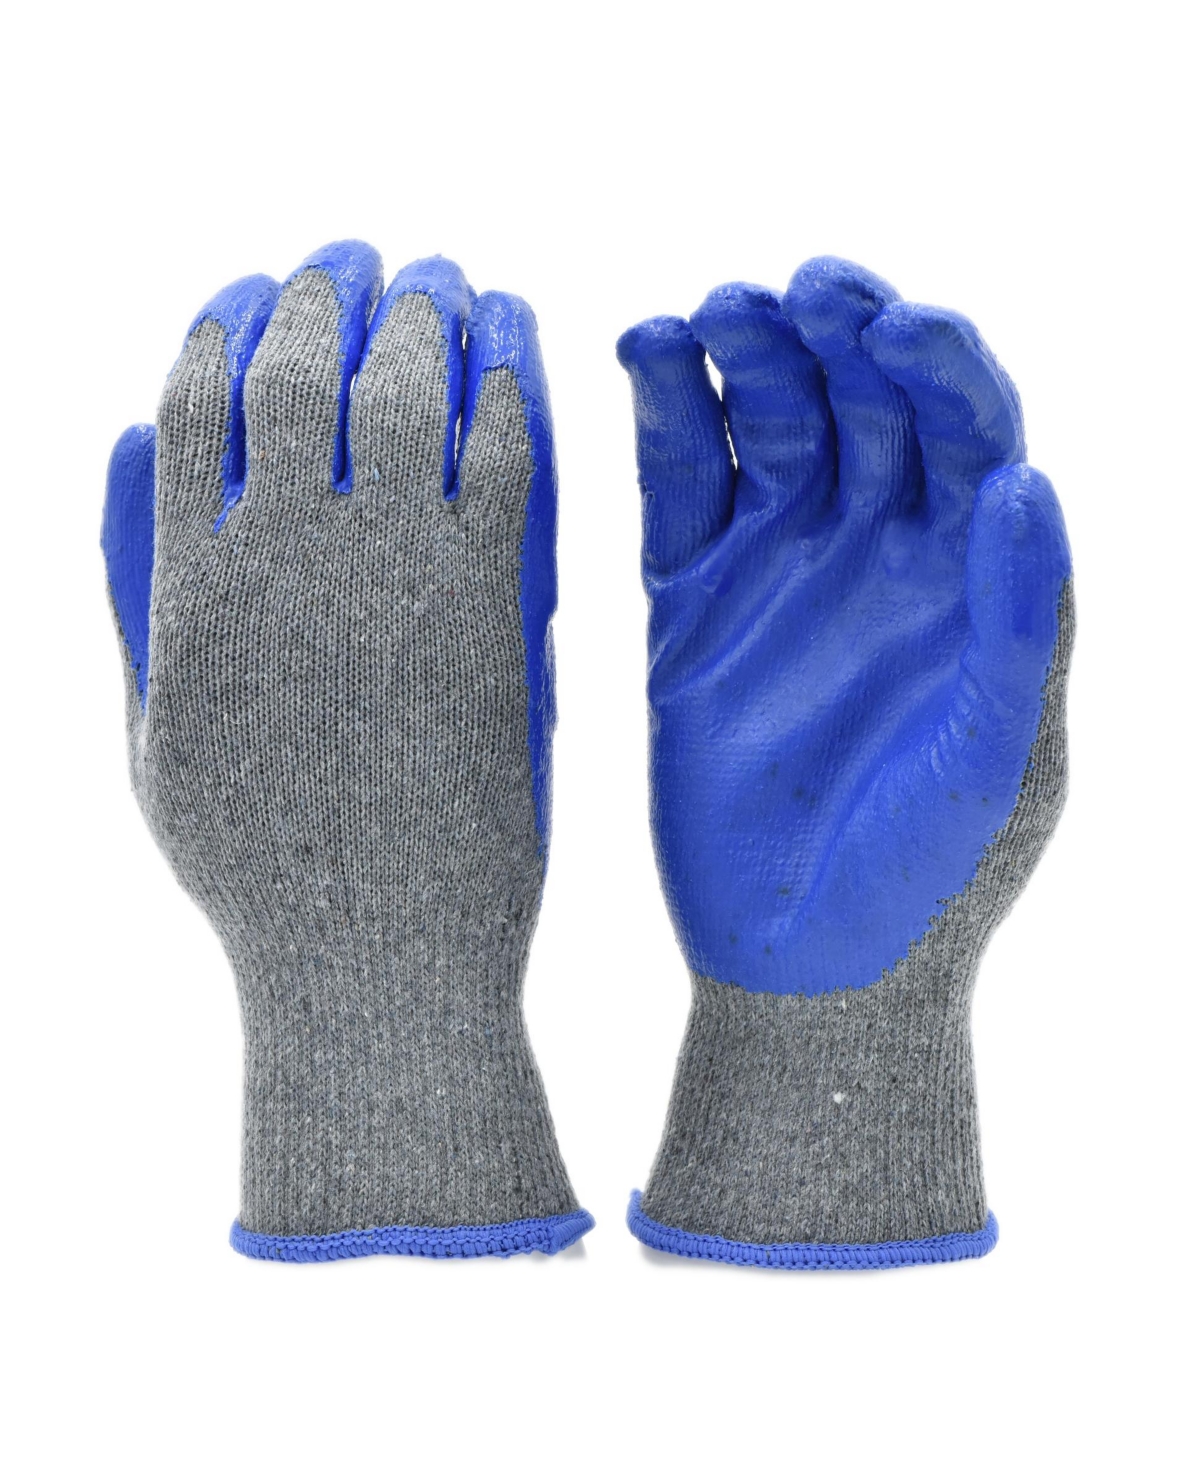 Latex Dipped Work Gloves, 10 Pairs - Blue